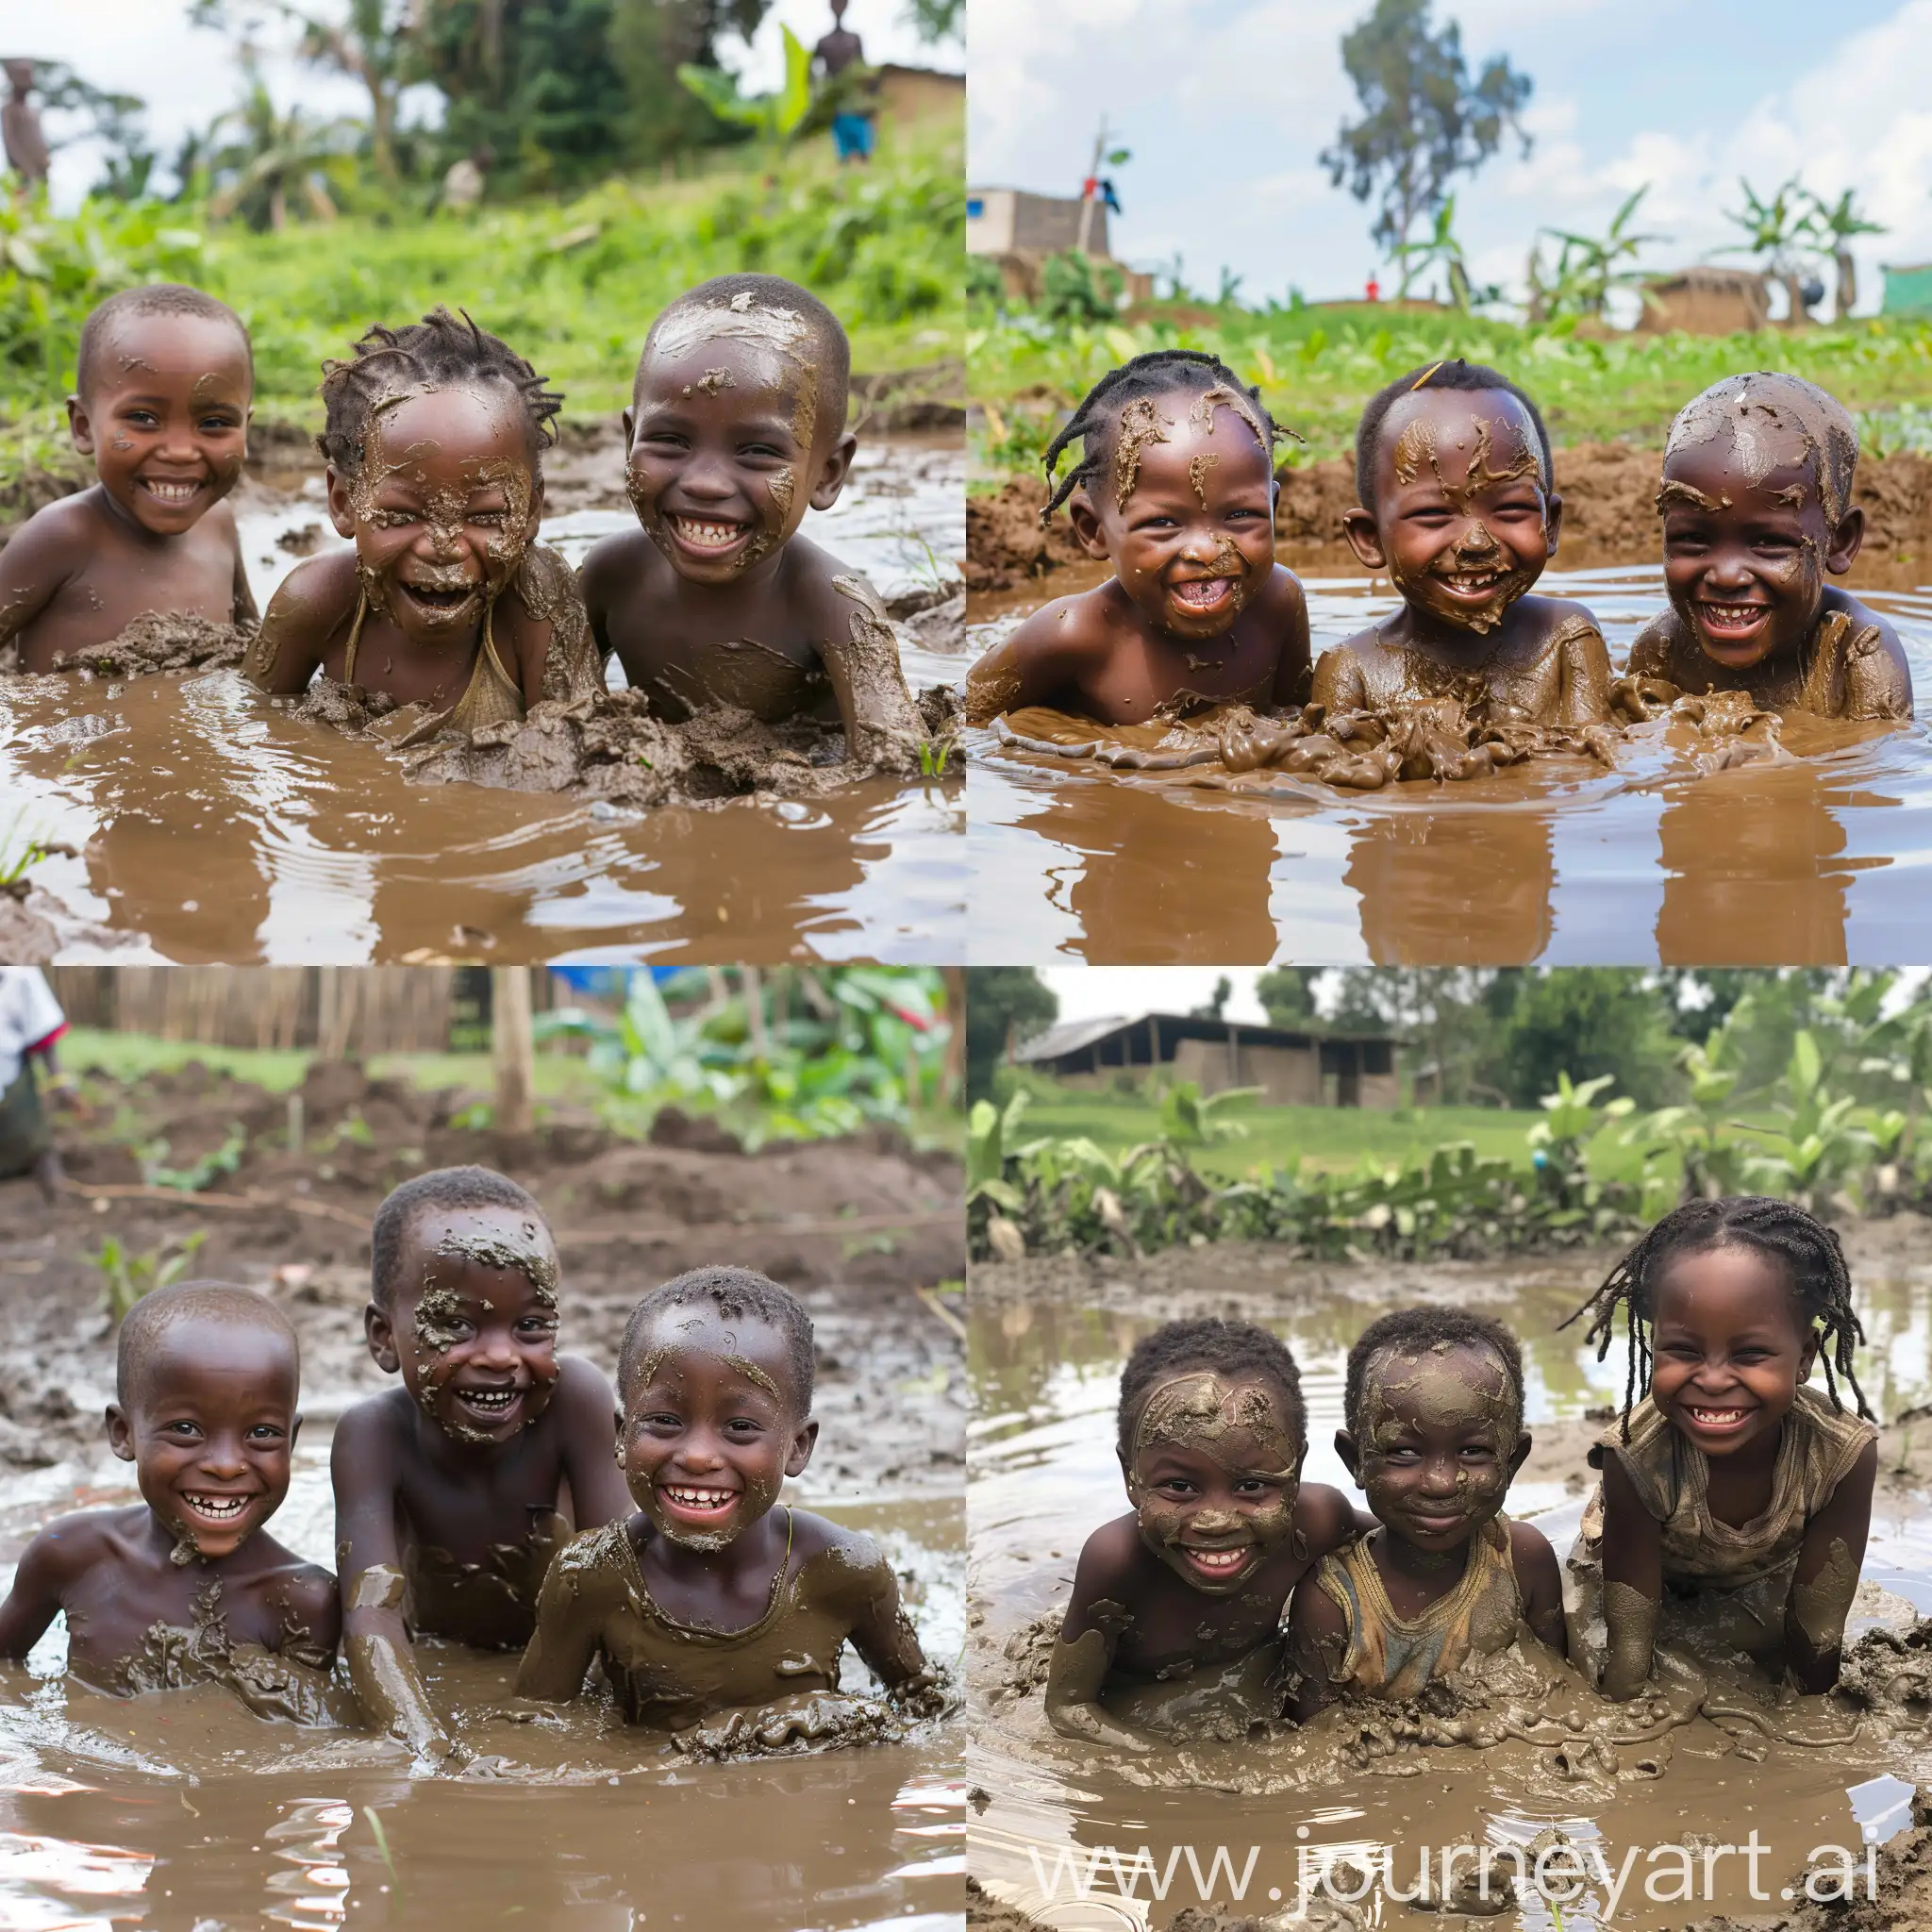 3 African kids playing in a pond of thick mud. They have mud all over their faces and smiling on a bright sunny day.